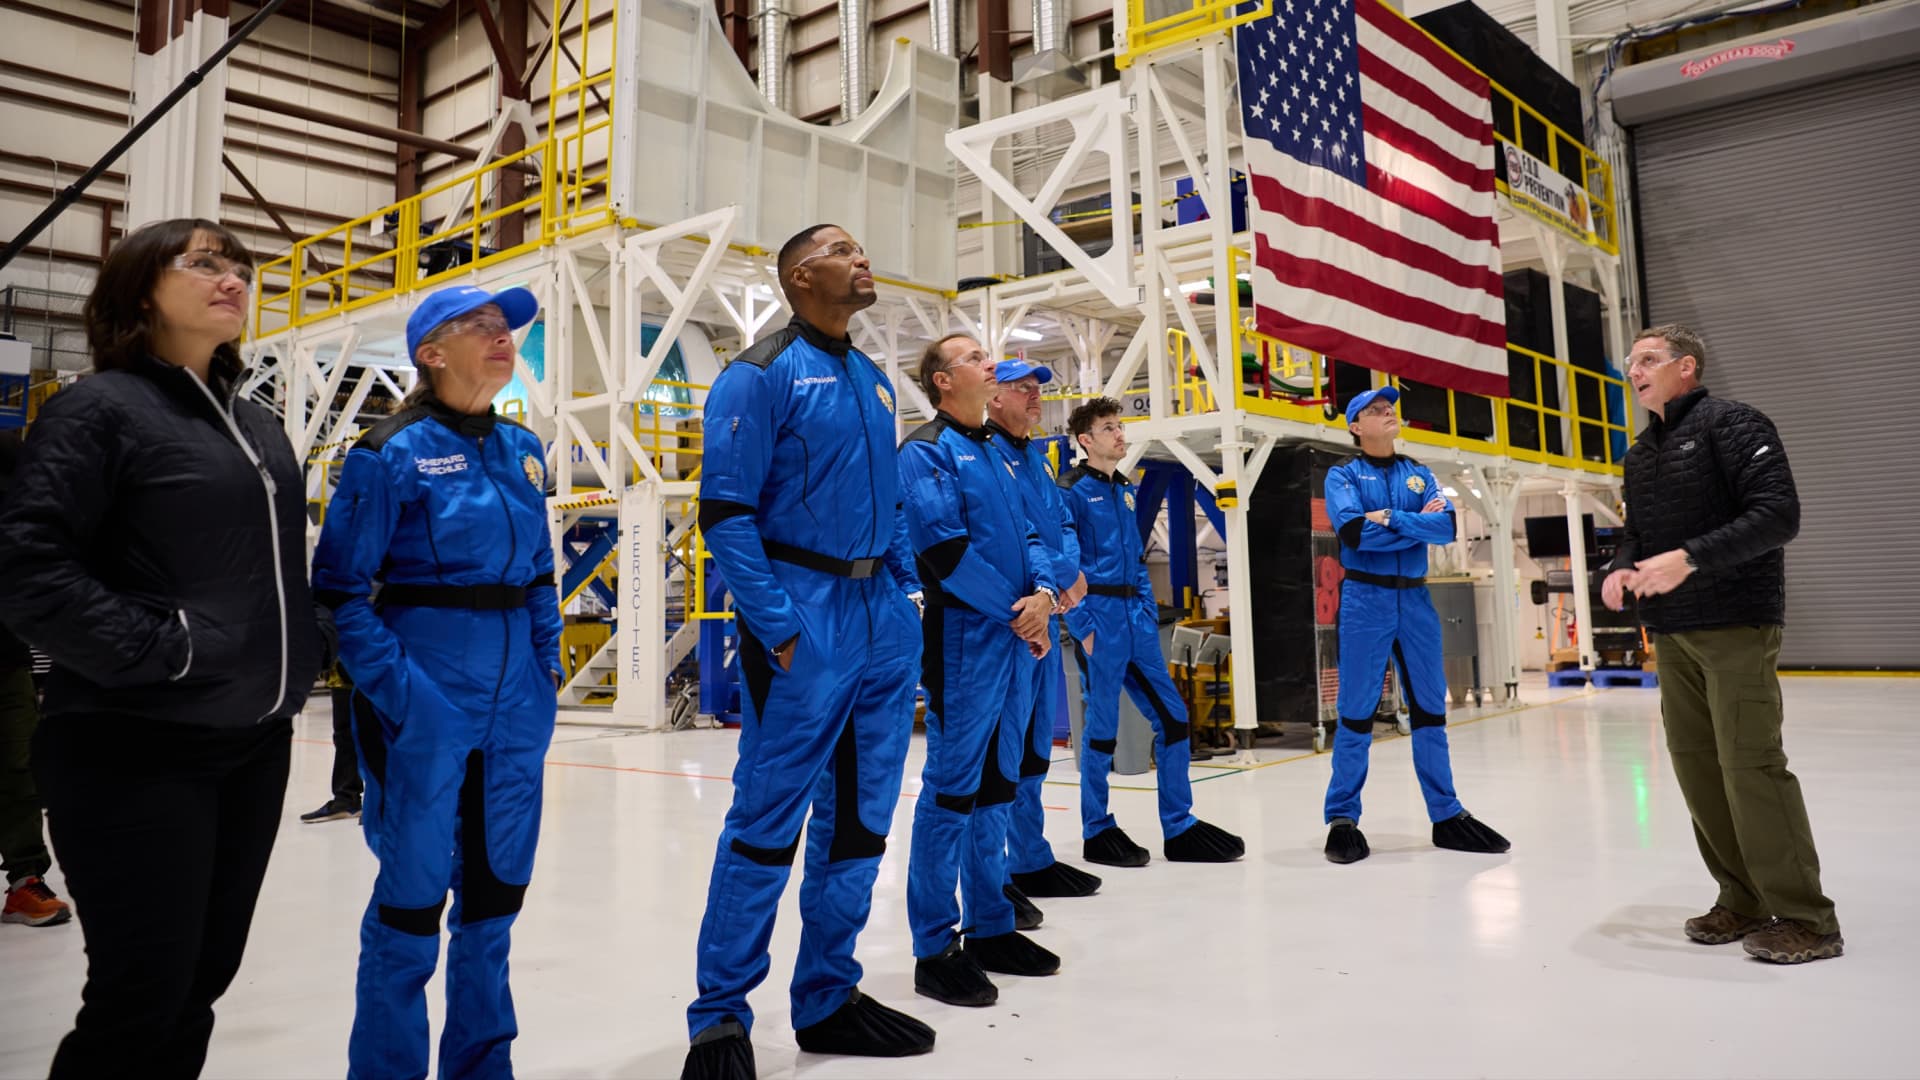 The crew of NS-19 takes a look at their ride to space. From left: Laura Shepard Churchley, Michael Strahan, Evan Dick, Lane Bess, Cameron Bess, and Dylan Taylor.